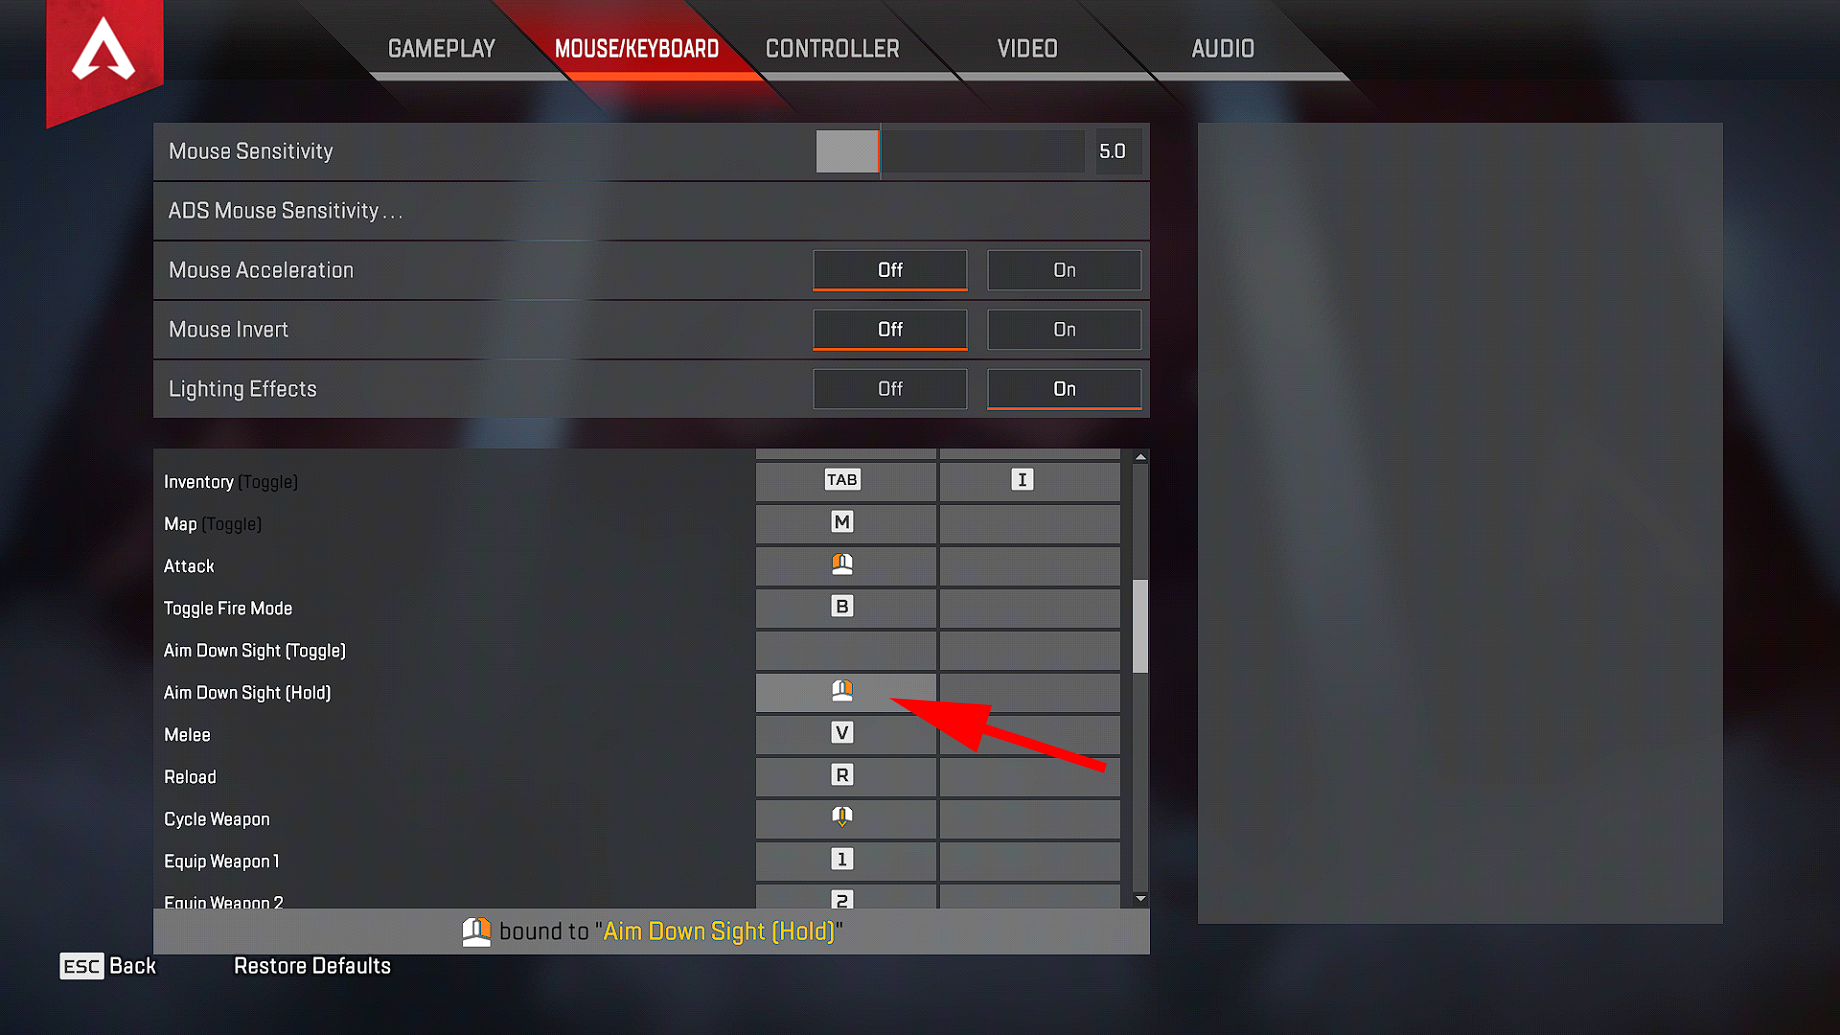 How To Turn Off Toggle Aim In Apex Legends